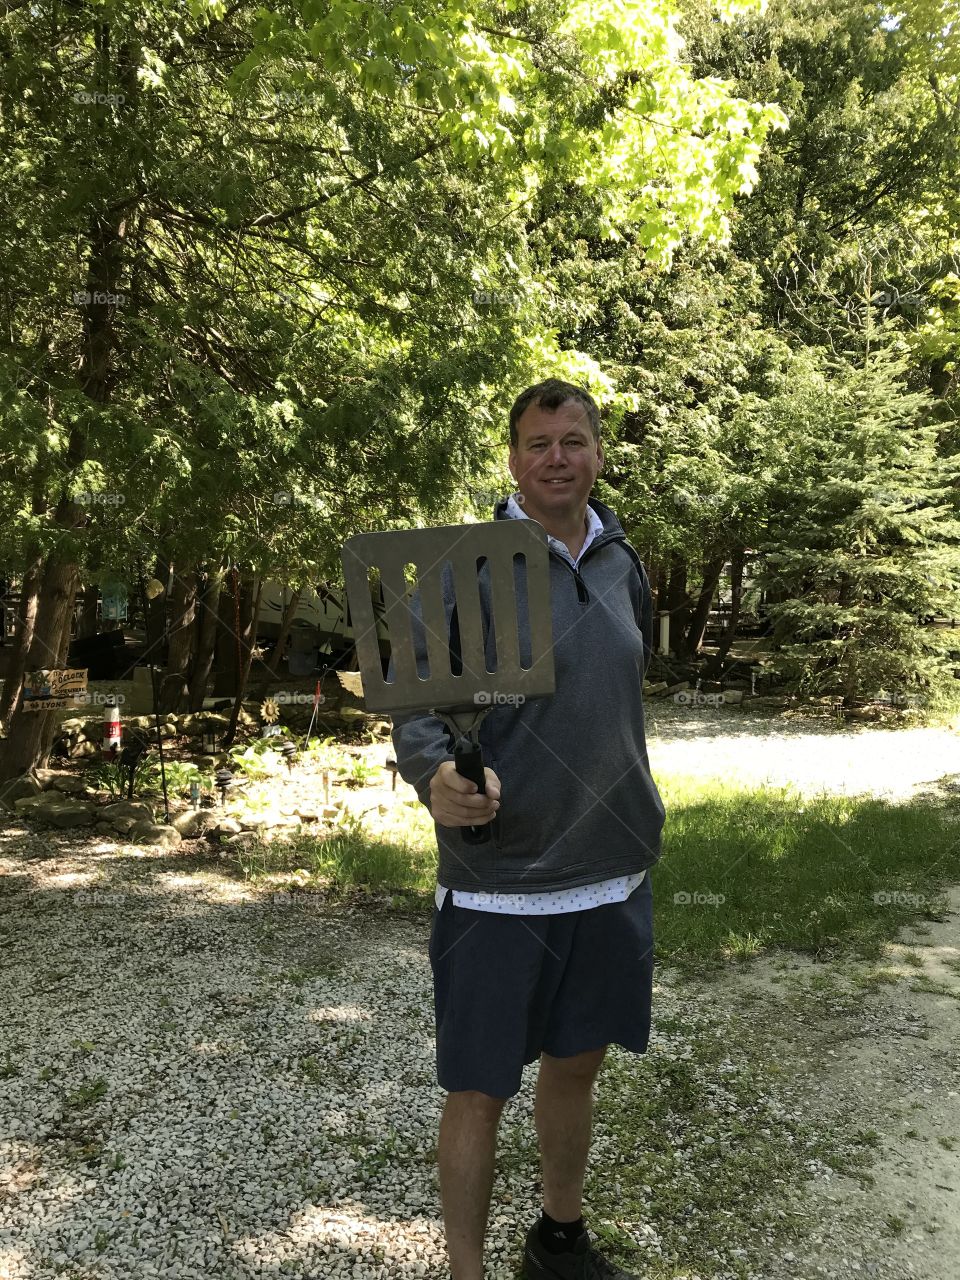 One giant spatula for man 